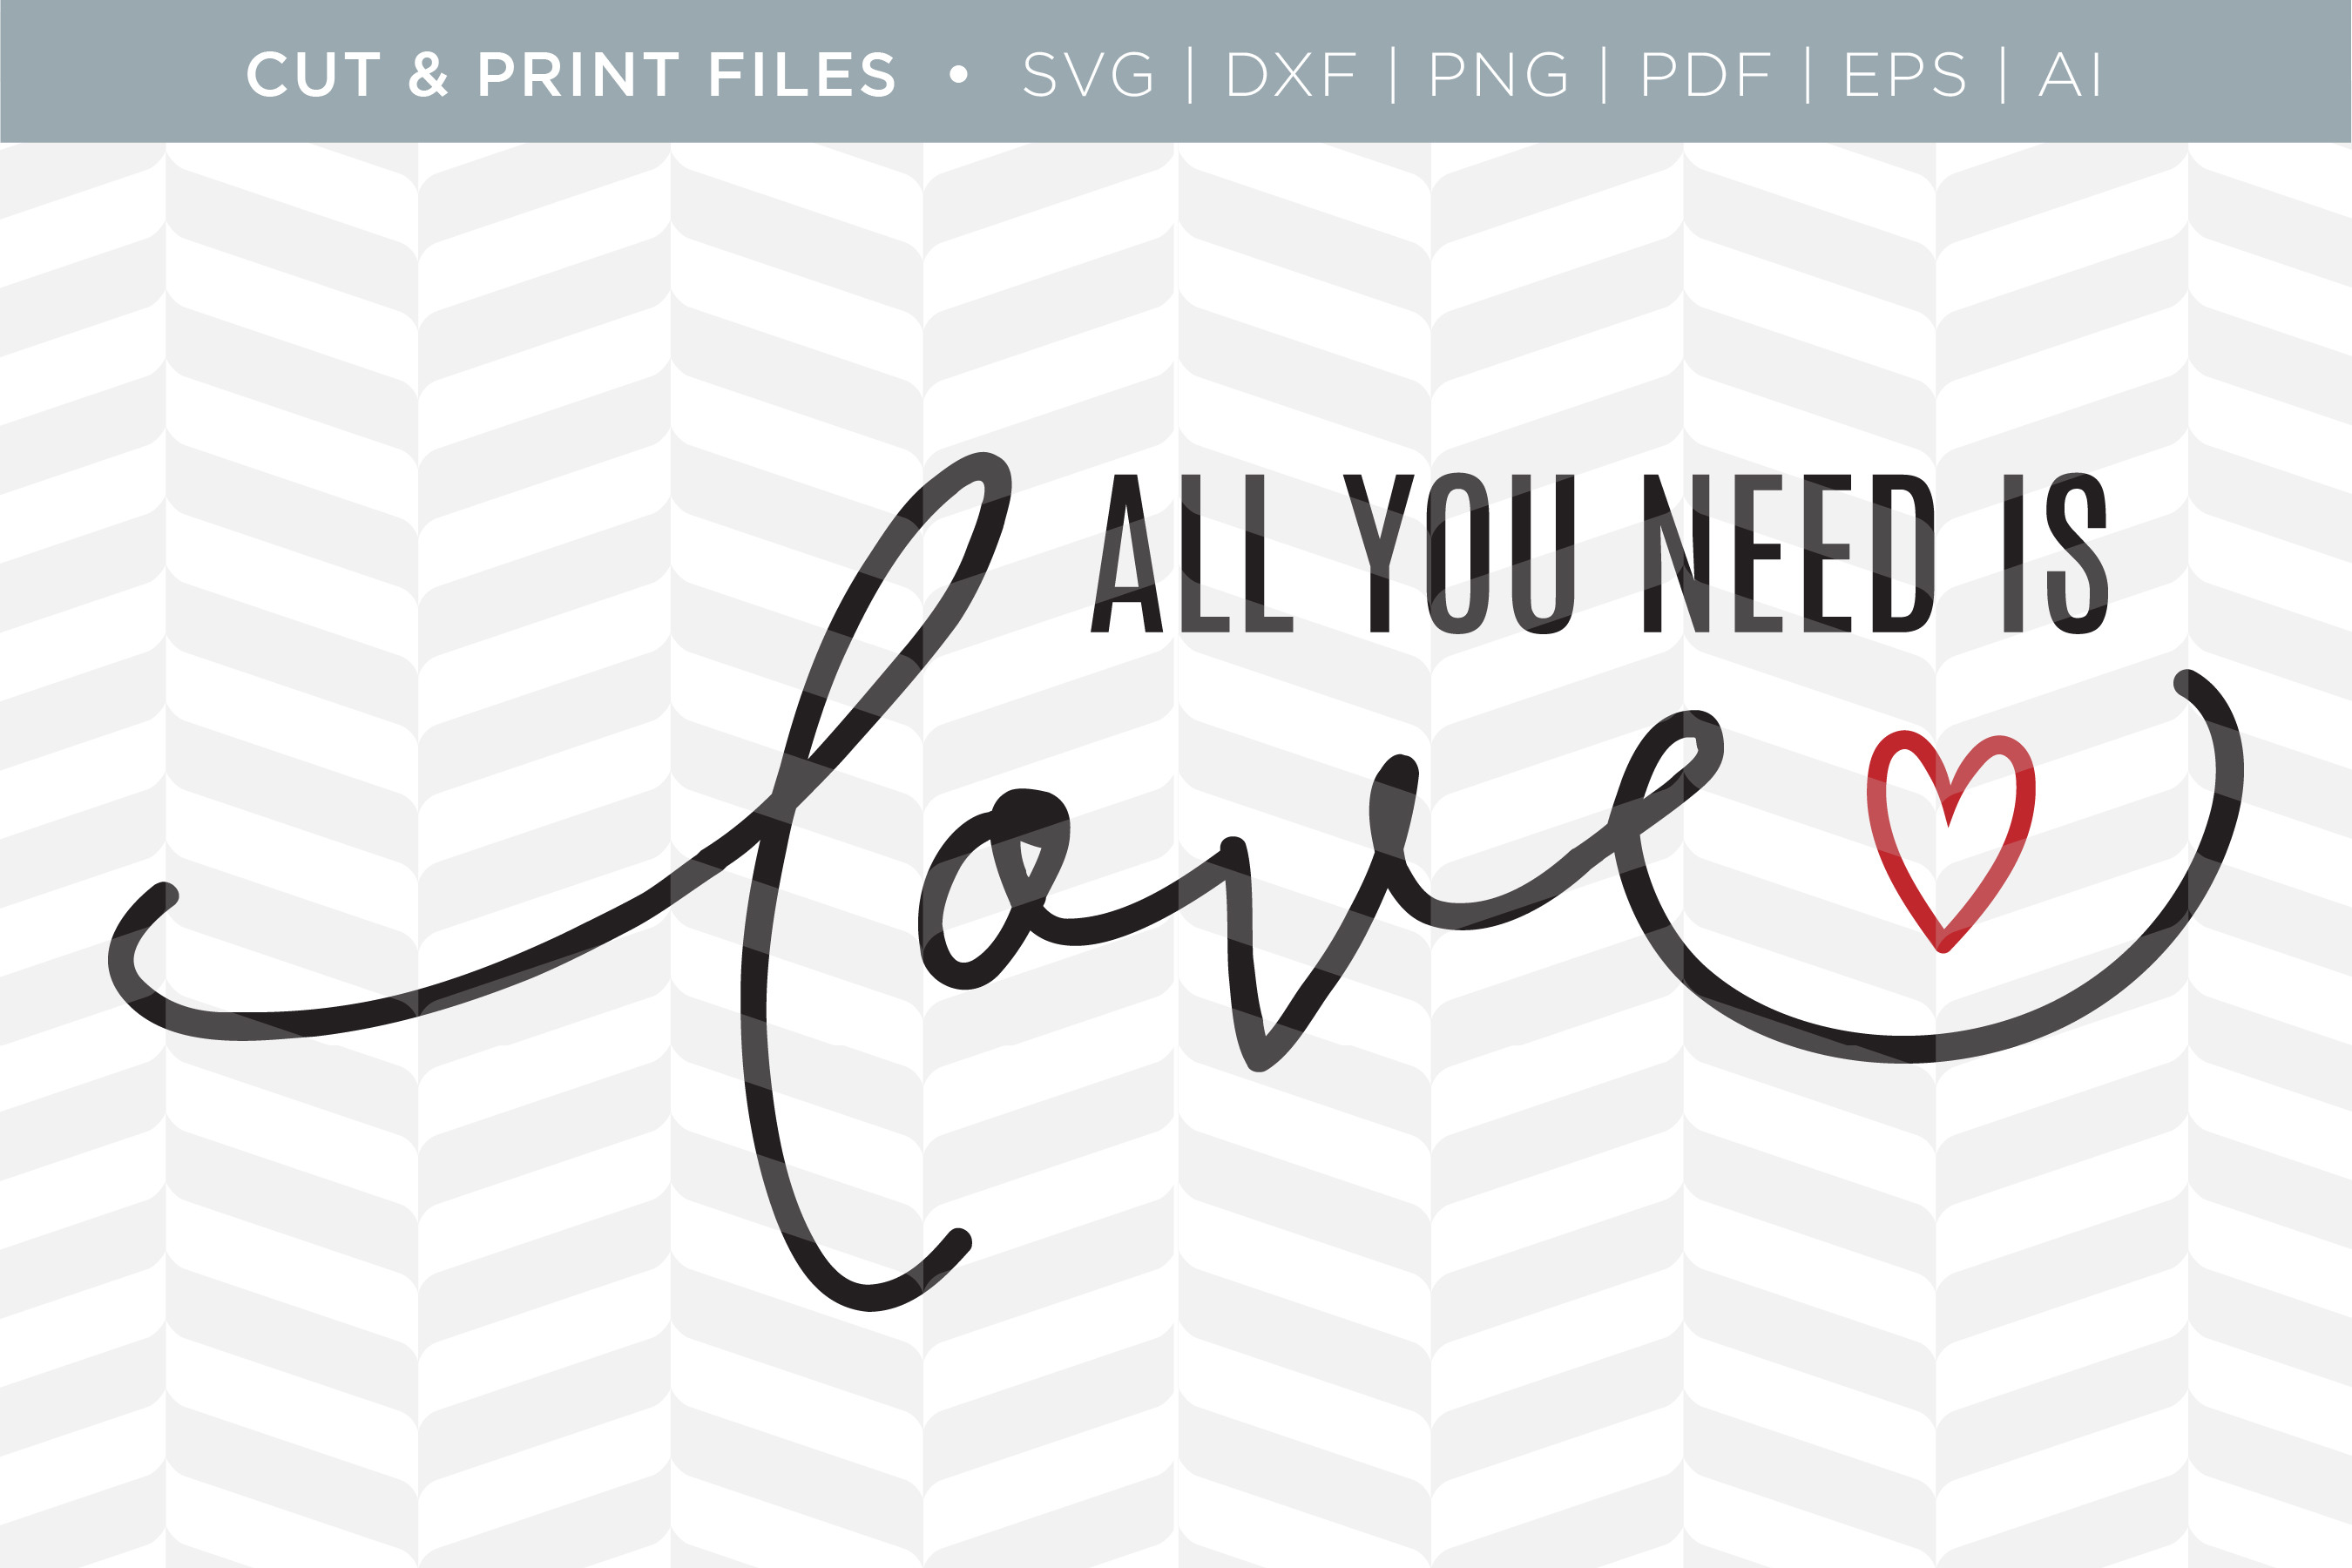 Download Need is Love SVG Cut/Print Files ~ Illustrations ...